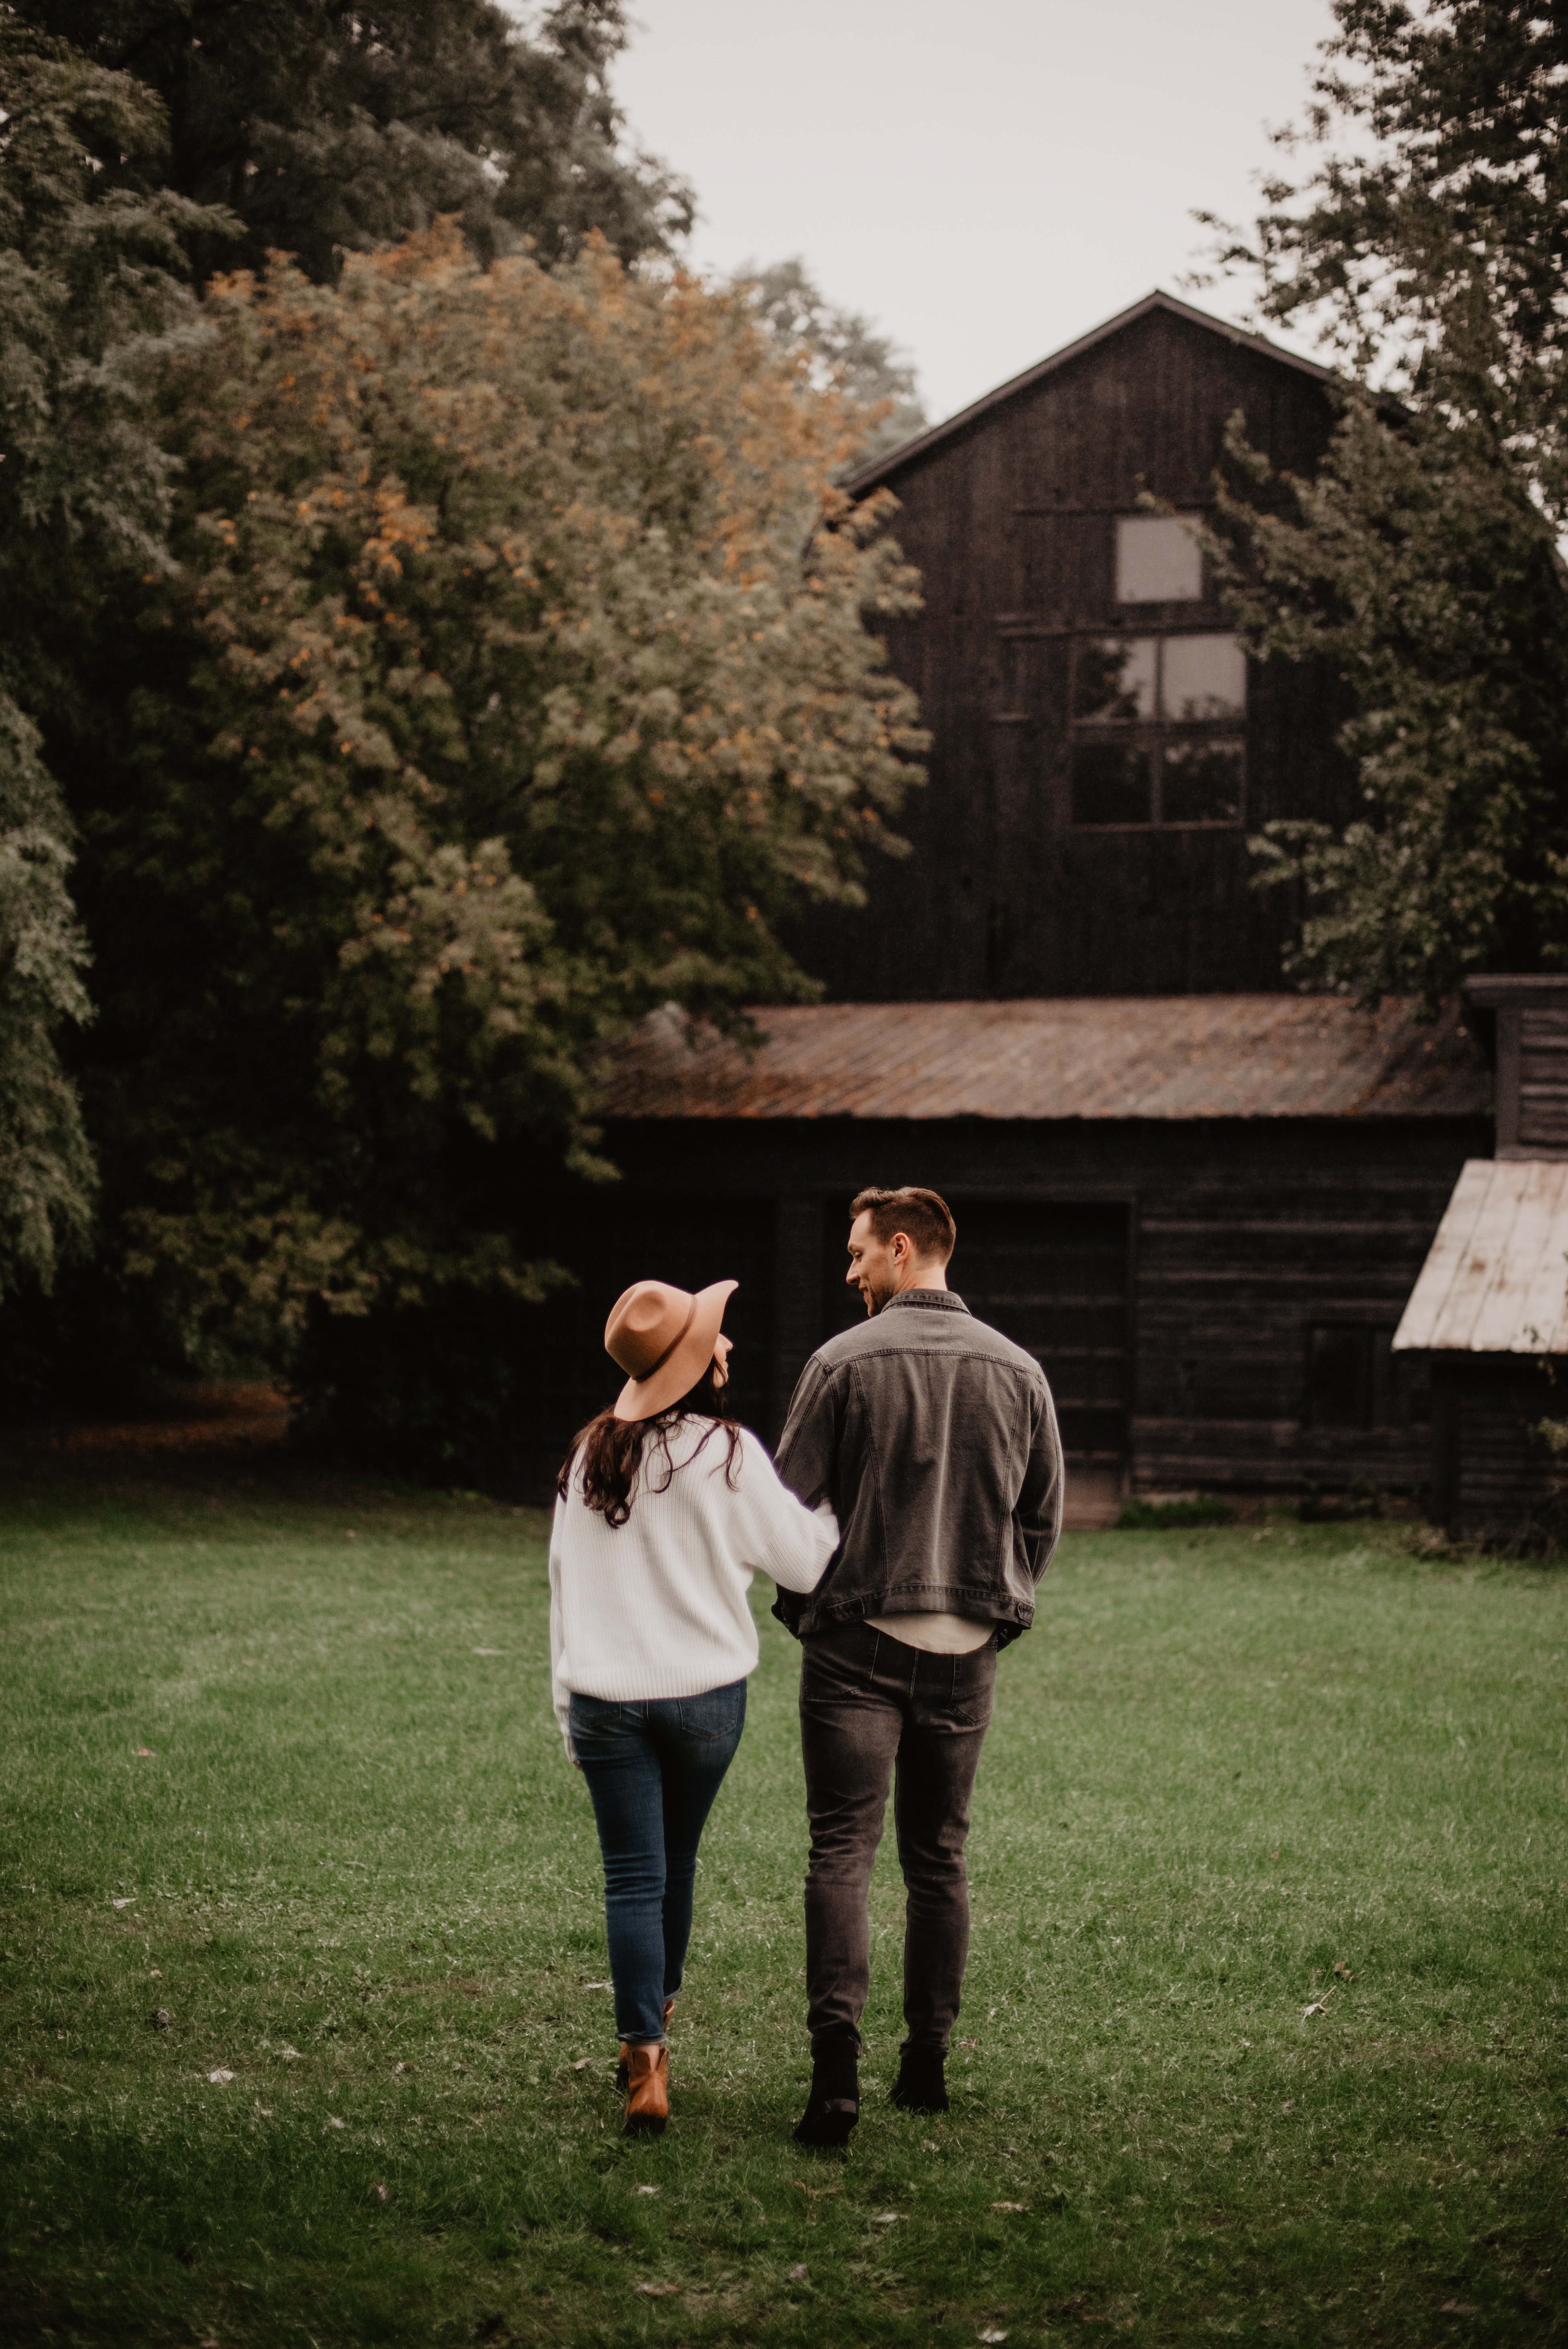 Oliver and Mary quickly found a suitable house that came with enough backyard space for the farm and garden | Source: Pexels